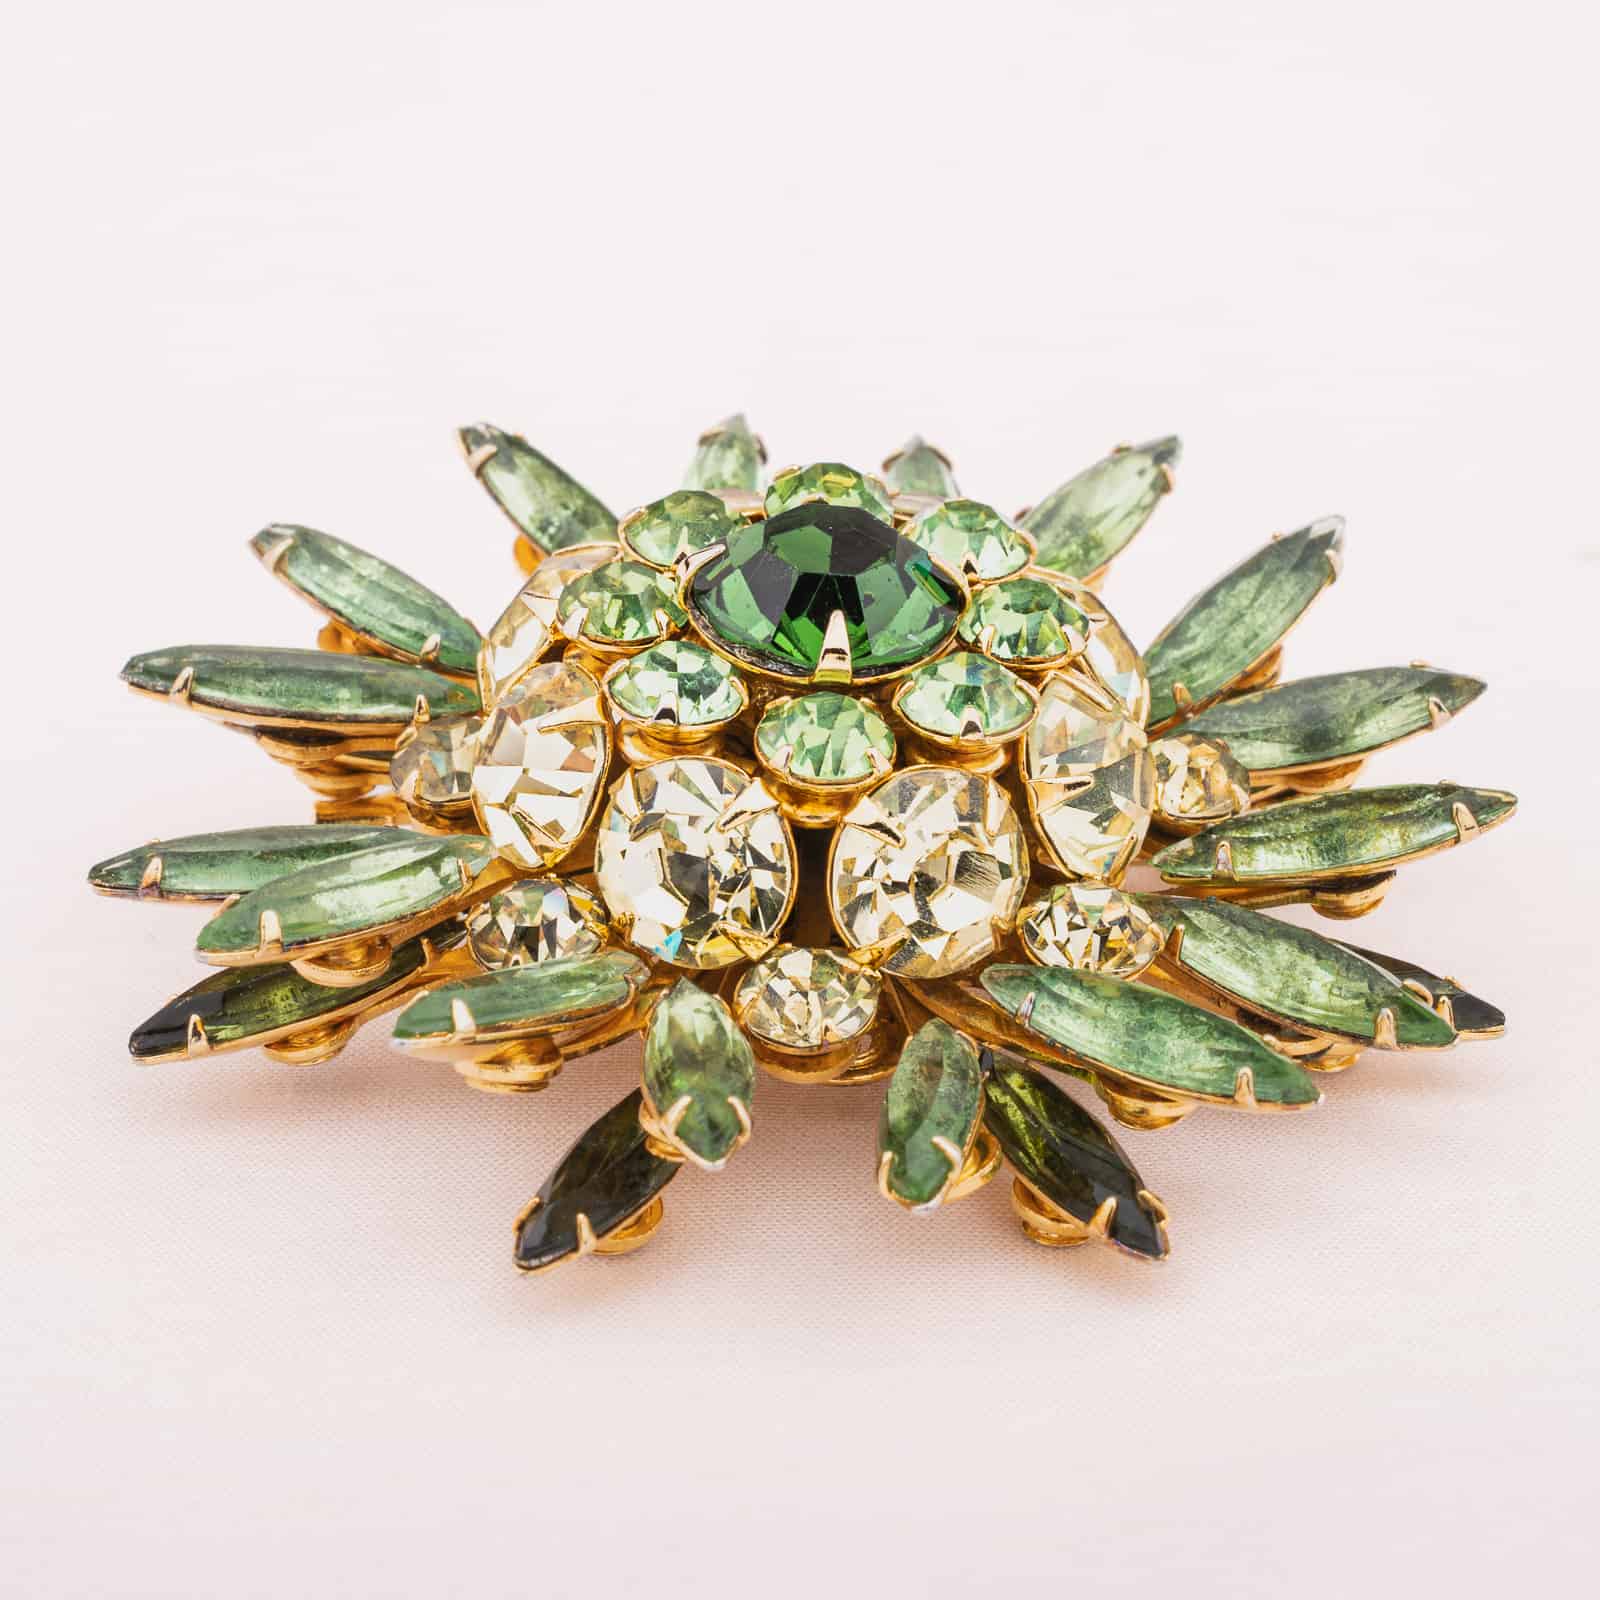 JUDY LEE large rhinestone brooch in green and yellow – Find 